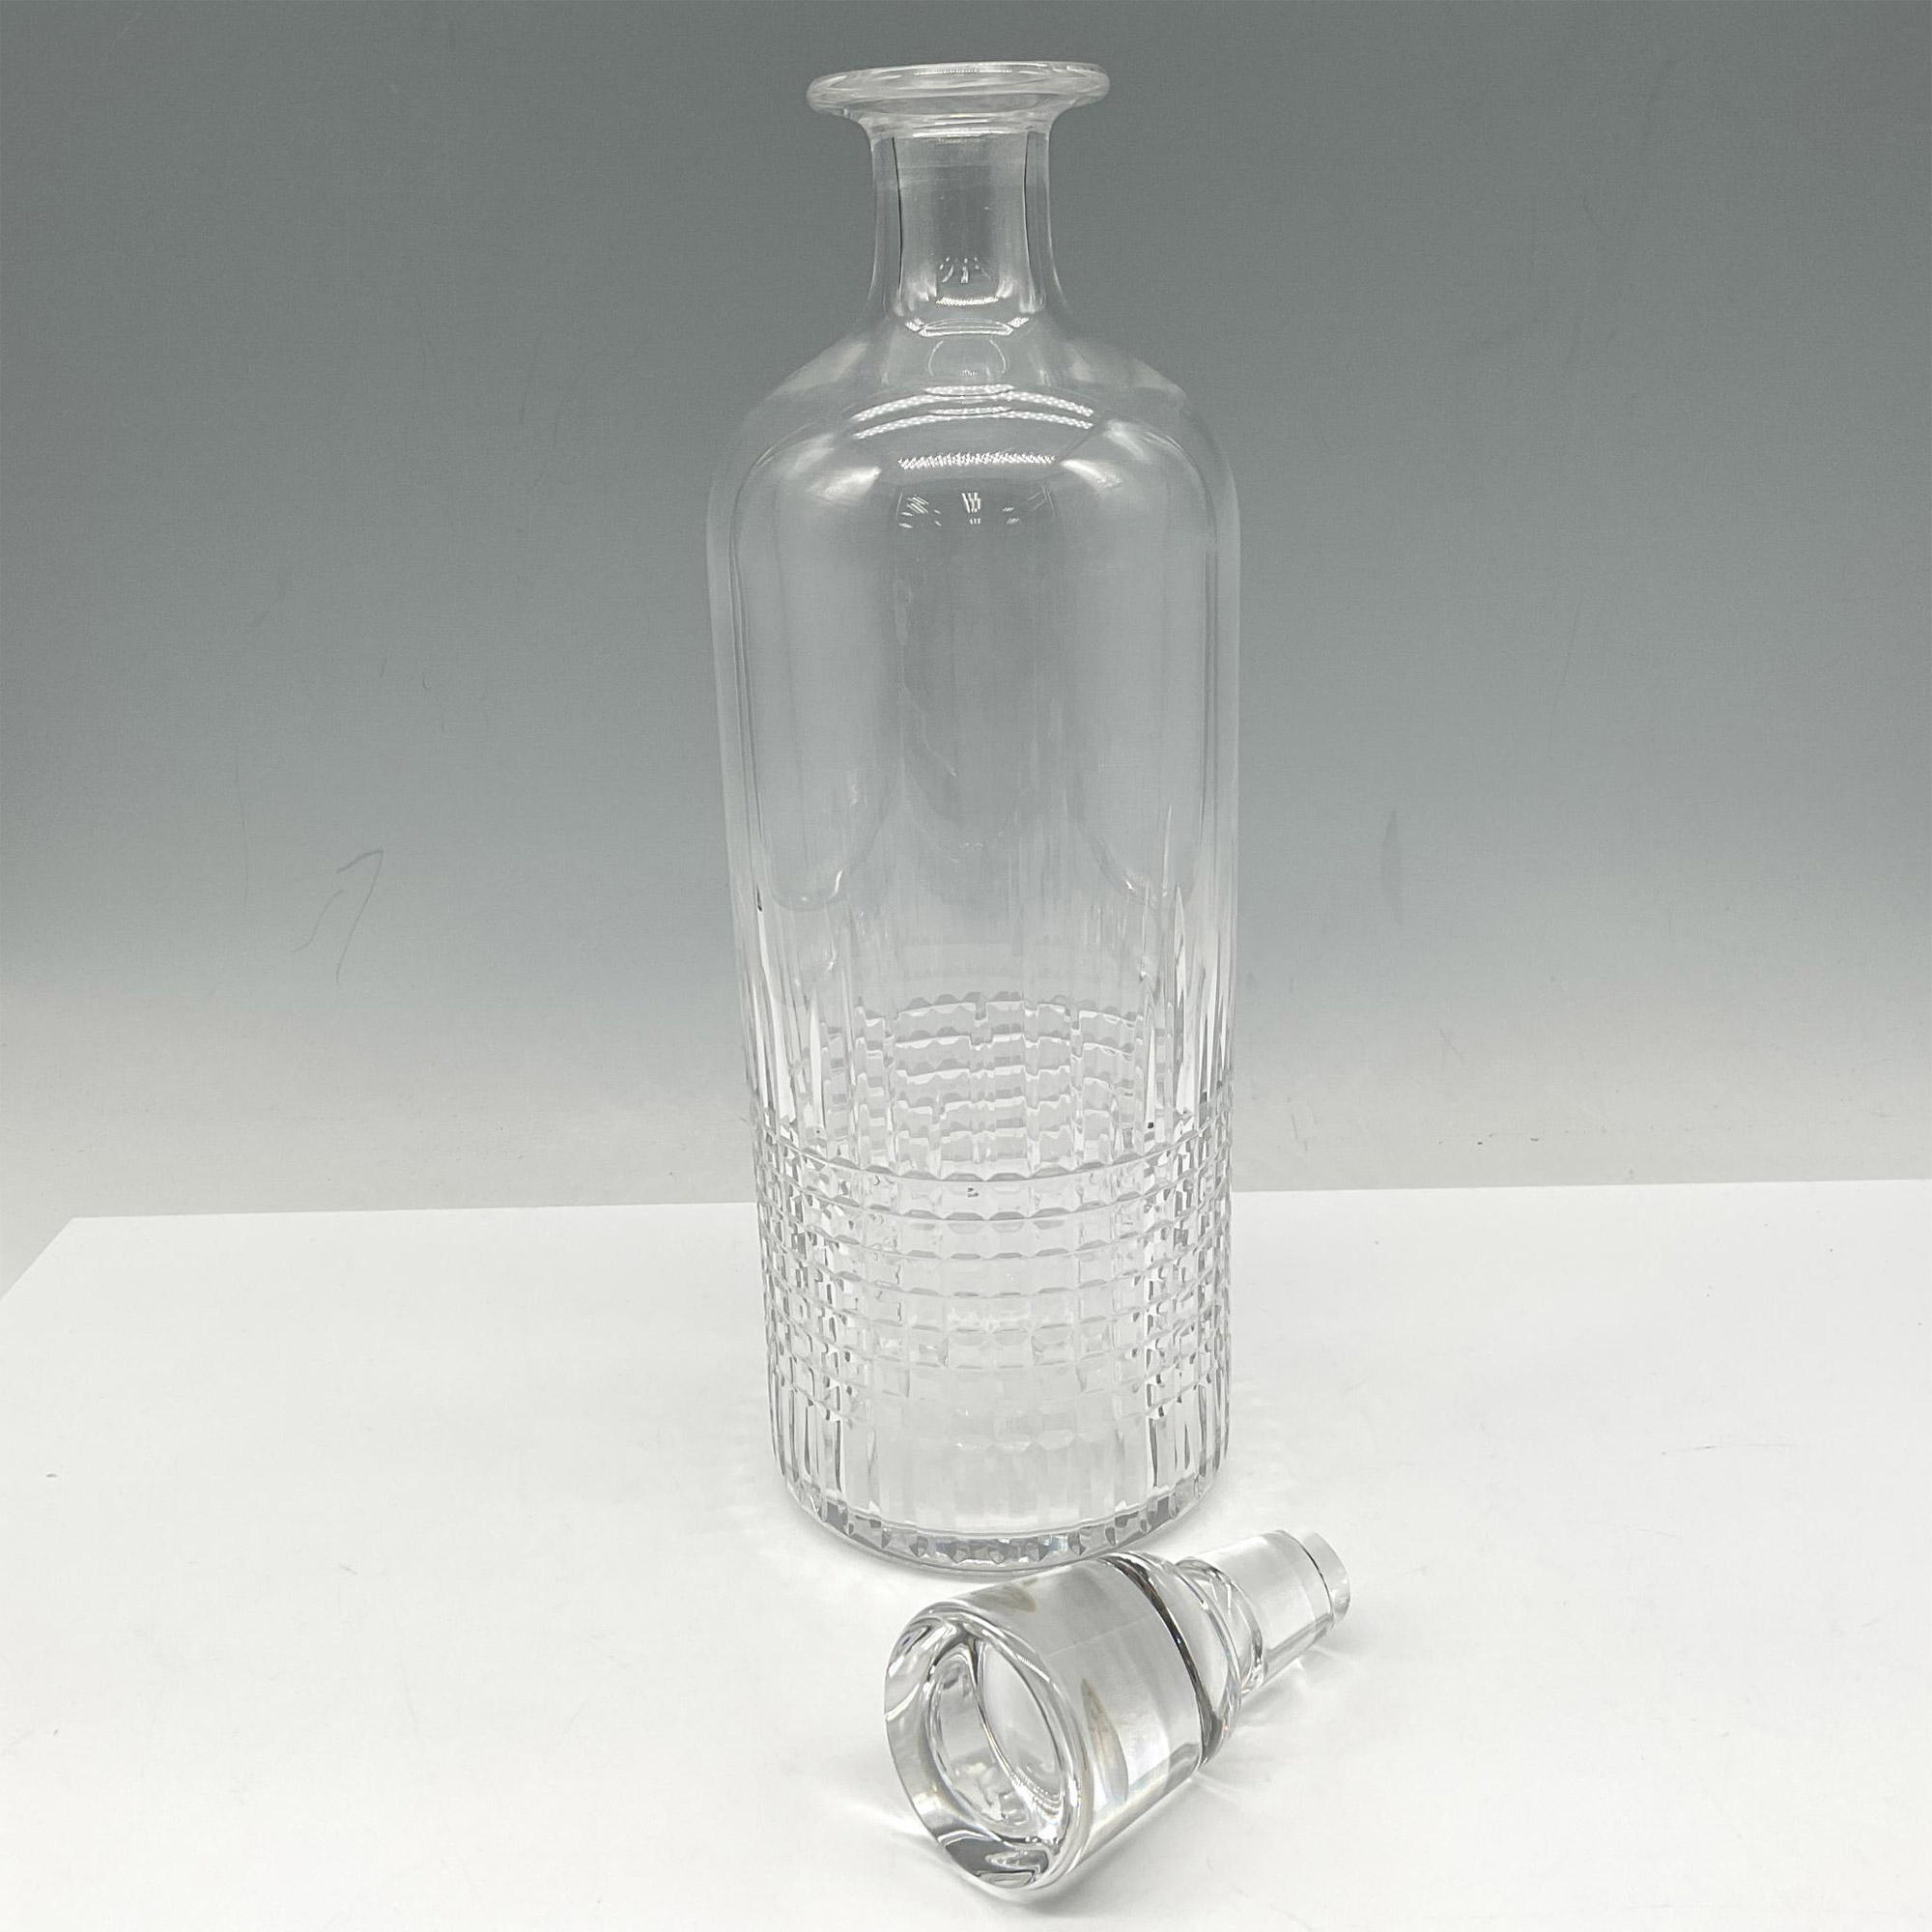 Baccarat Crystal Decanter with Stopper - Image 2 of 3